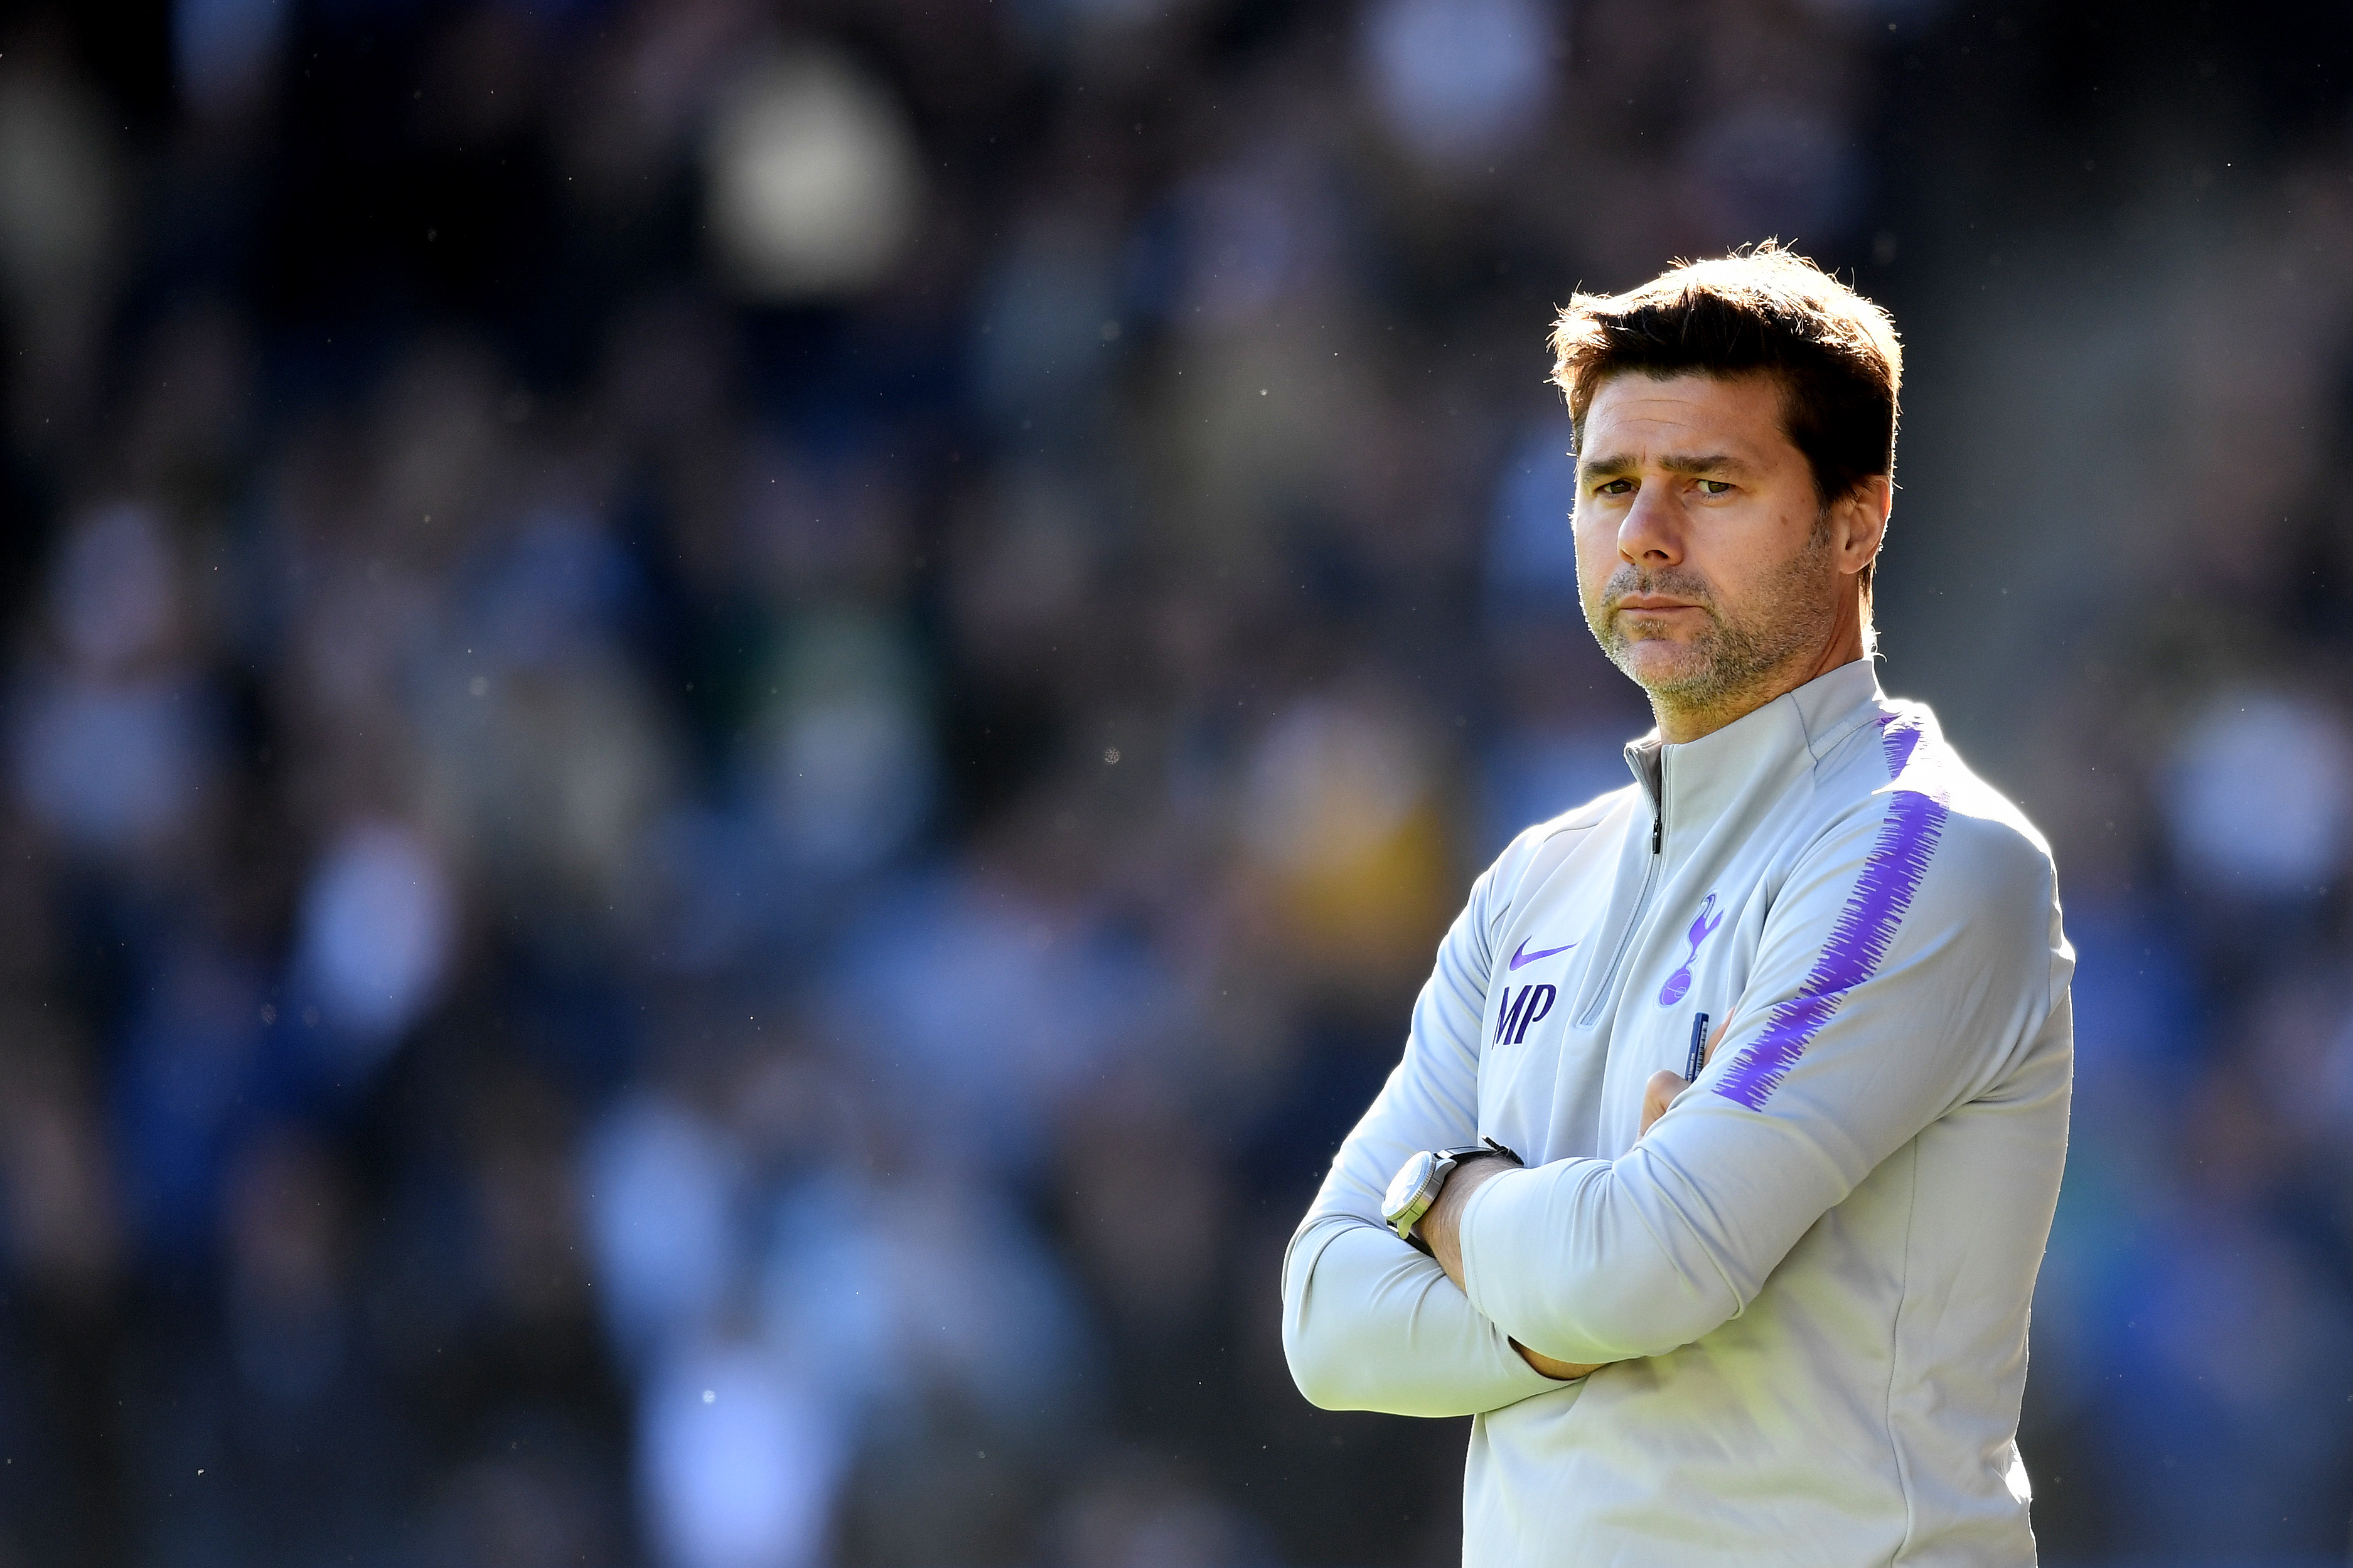 HUDDERSFIELD, ENGLAND - SEPTEMBER 29:  Mauricio Pochettino, Manager of Tottenham Hotspur looks on during the Premier League match between Huddersfield Town and Tottenham Hotspur at John Smith's Stadium on September 29, 2018 in Huddersfield, United Kingdom.  (Photo by Michael Regan/Getty Images)